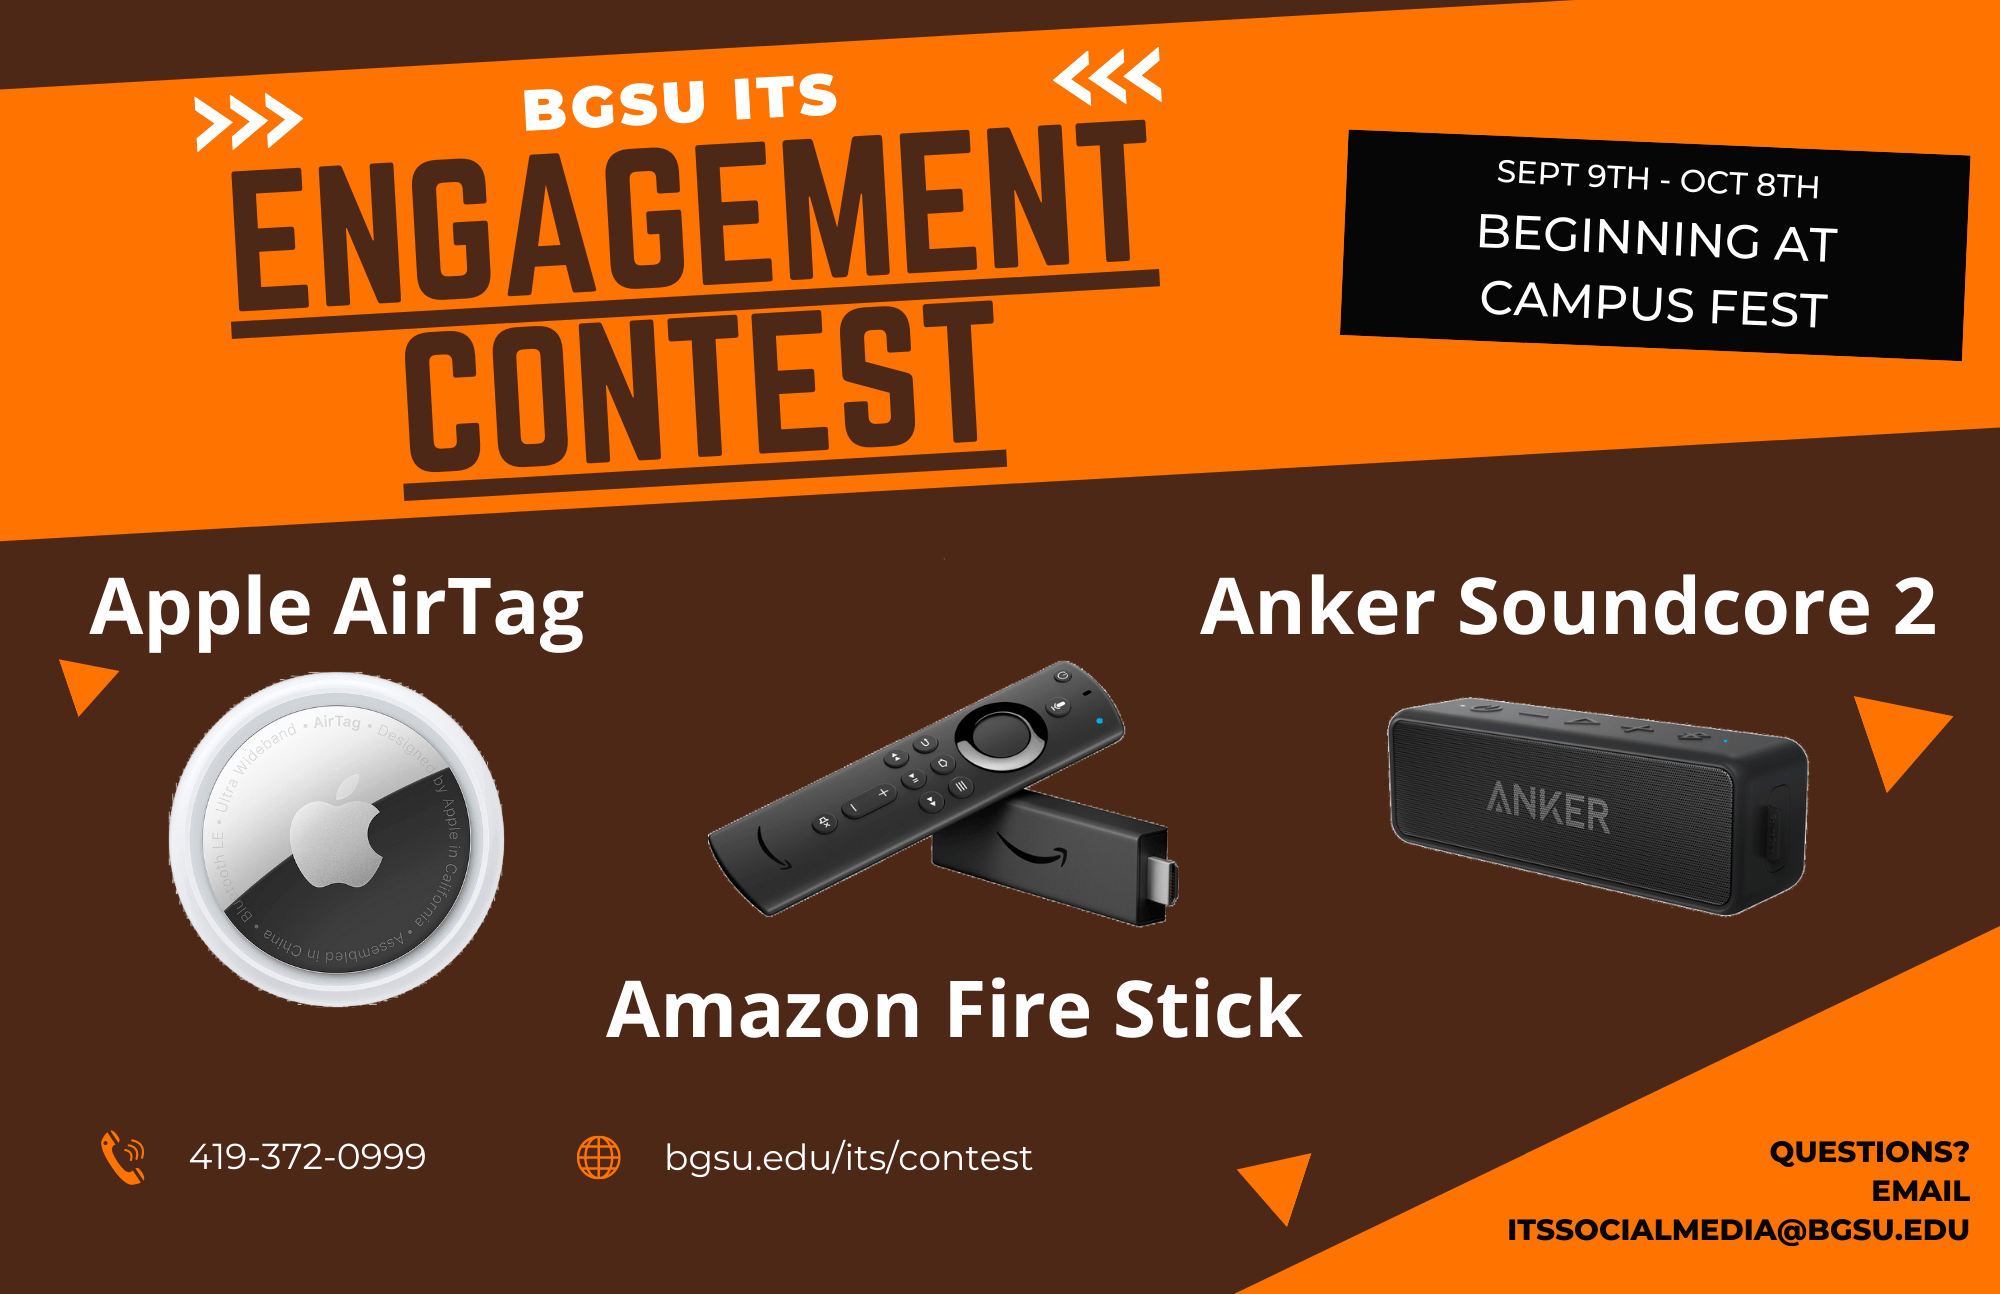 BGSU ITS Engagement Contest Prizes include Apple AirTag, Amazon Firestick and Anker Soundcore 2 bluetooth speaker. Contest begins at Campus fest and lasts from September 9 to October 8th. Contact us at 419-372-0999, www.bgsu.edu/its or itssocialmedia@bgsu.edu